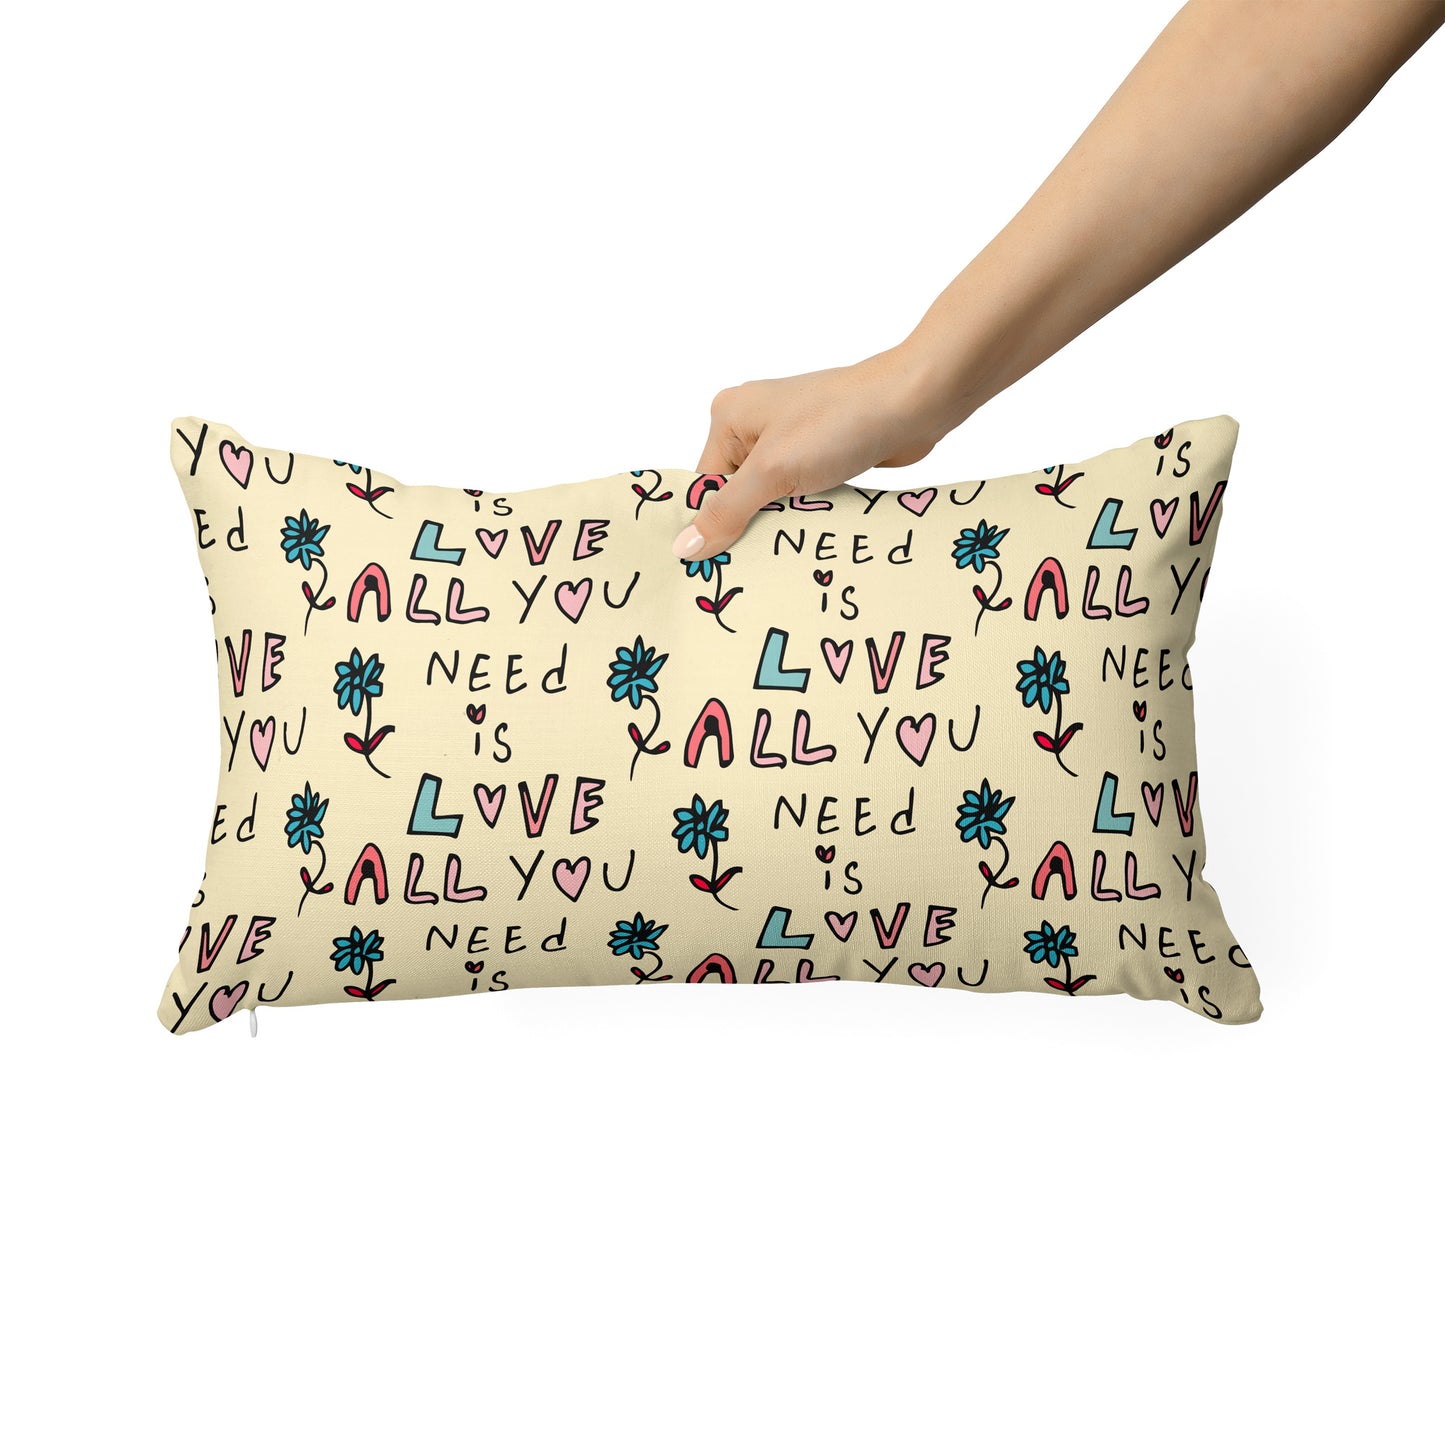 All you need is love - Rectangle Cushion